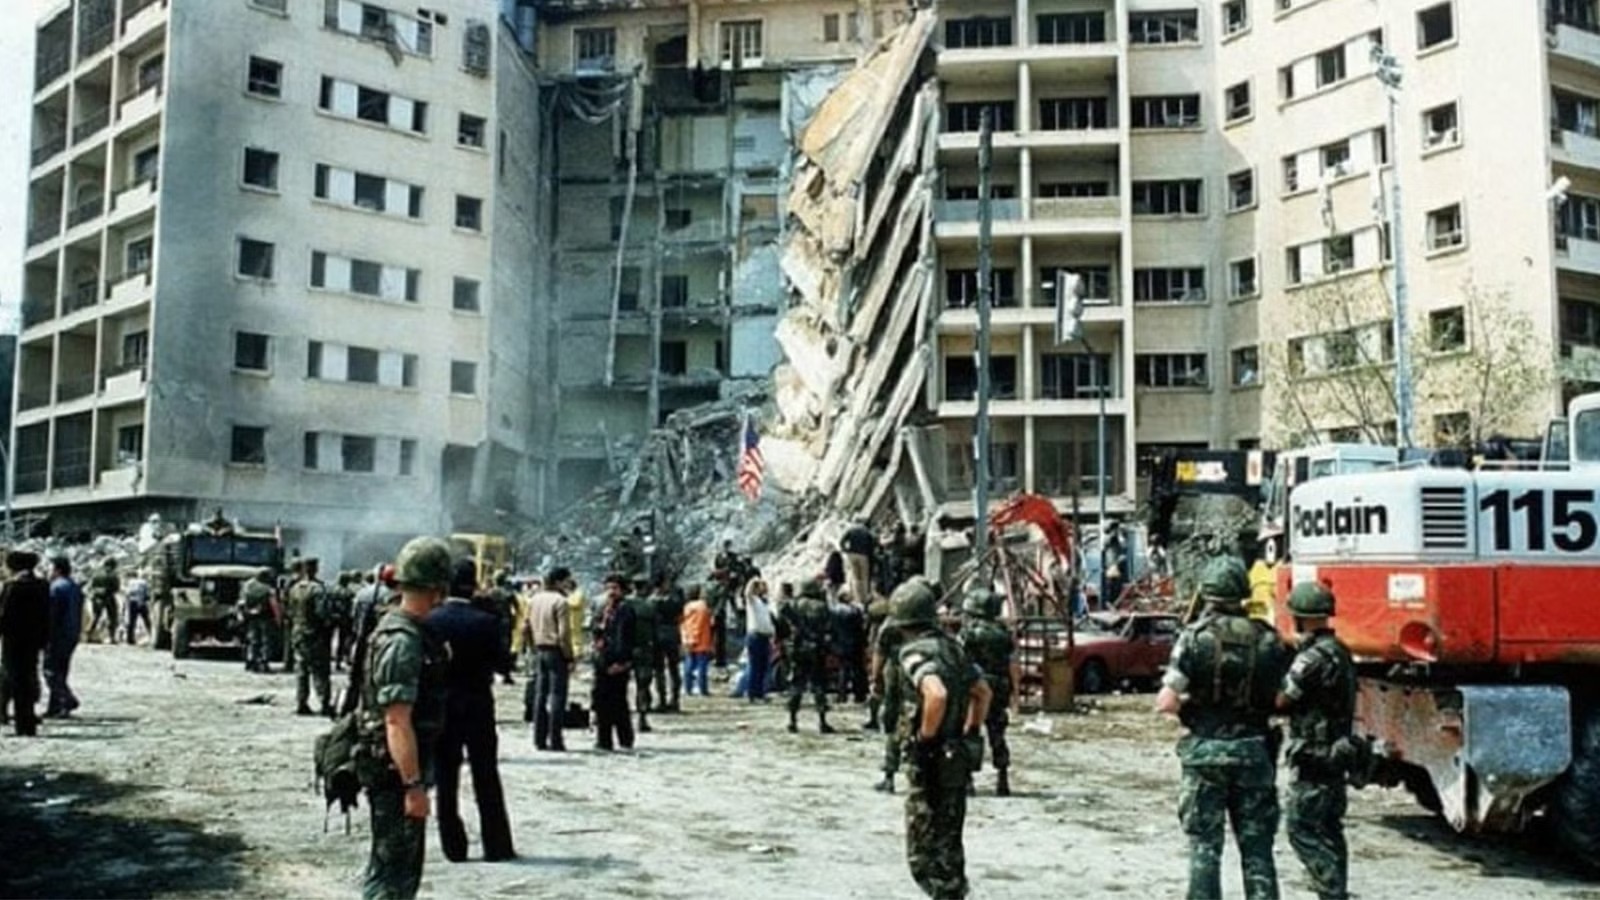 U.S. judge orders Iran's central bank to pay $1.68 bn to families of Beirut's 1983 attack victims